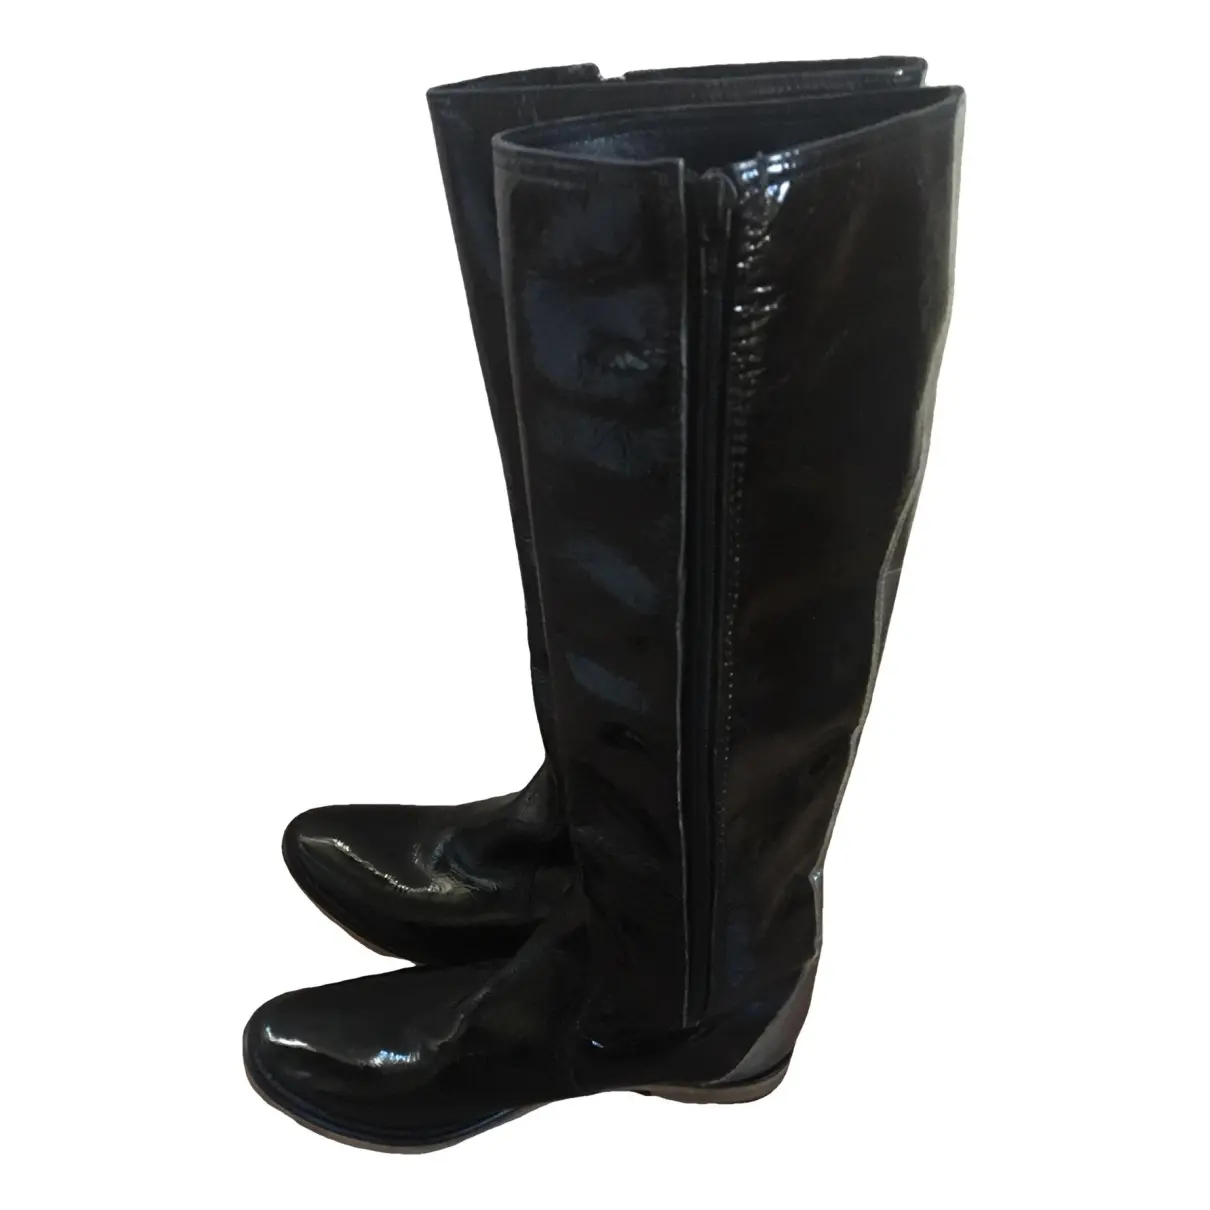 Patent leather boots